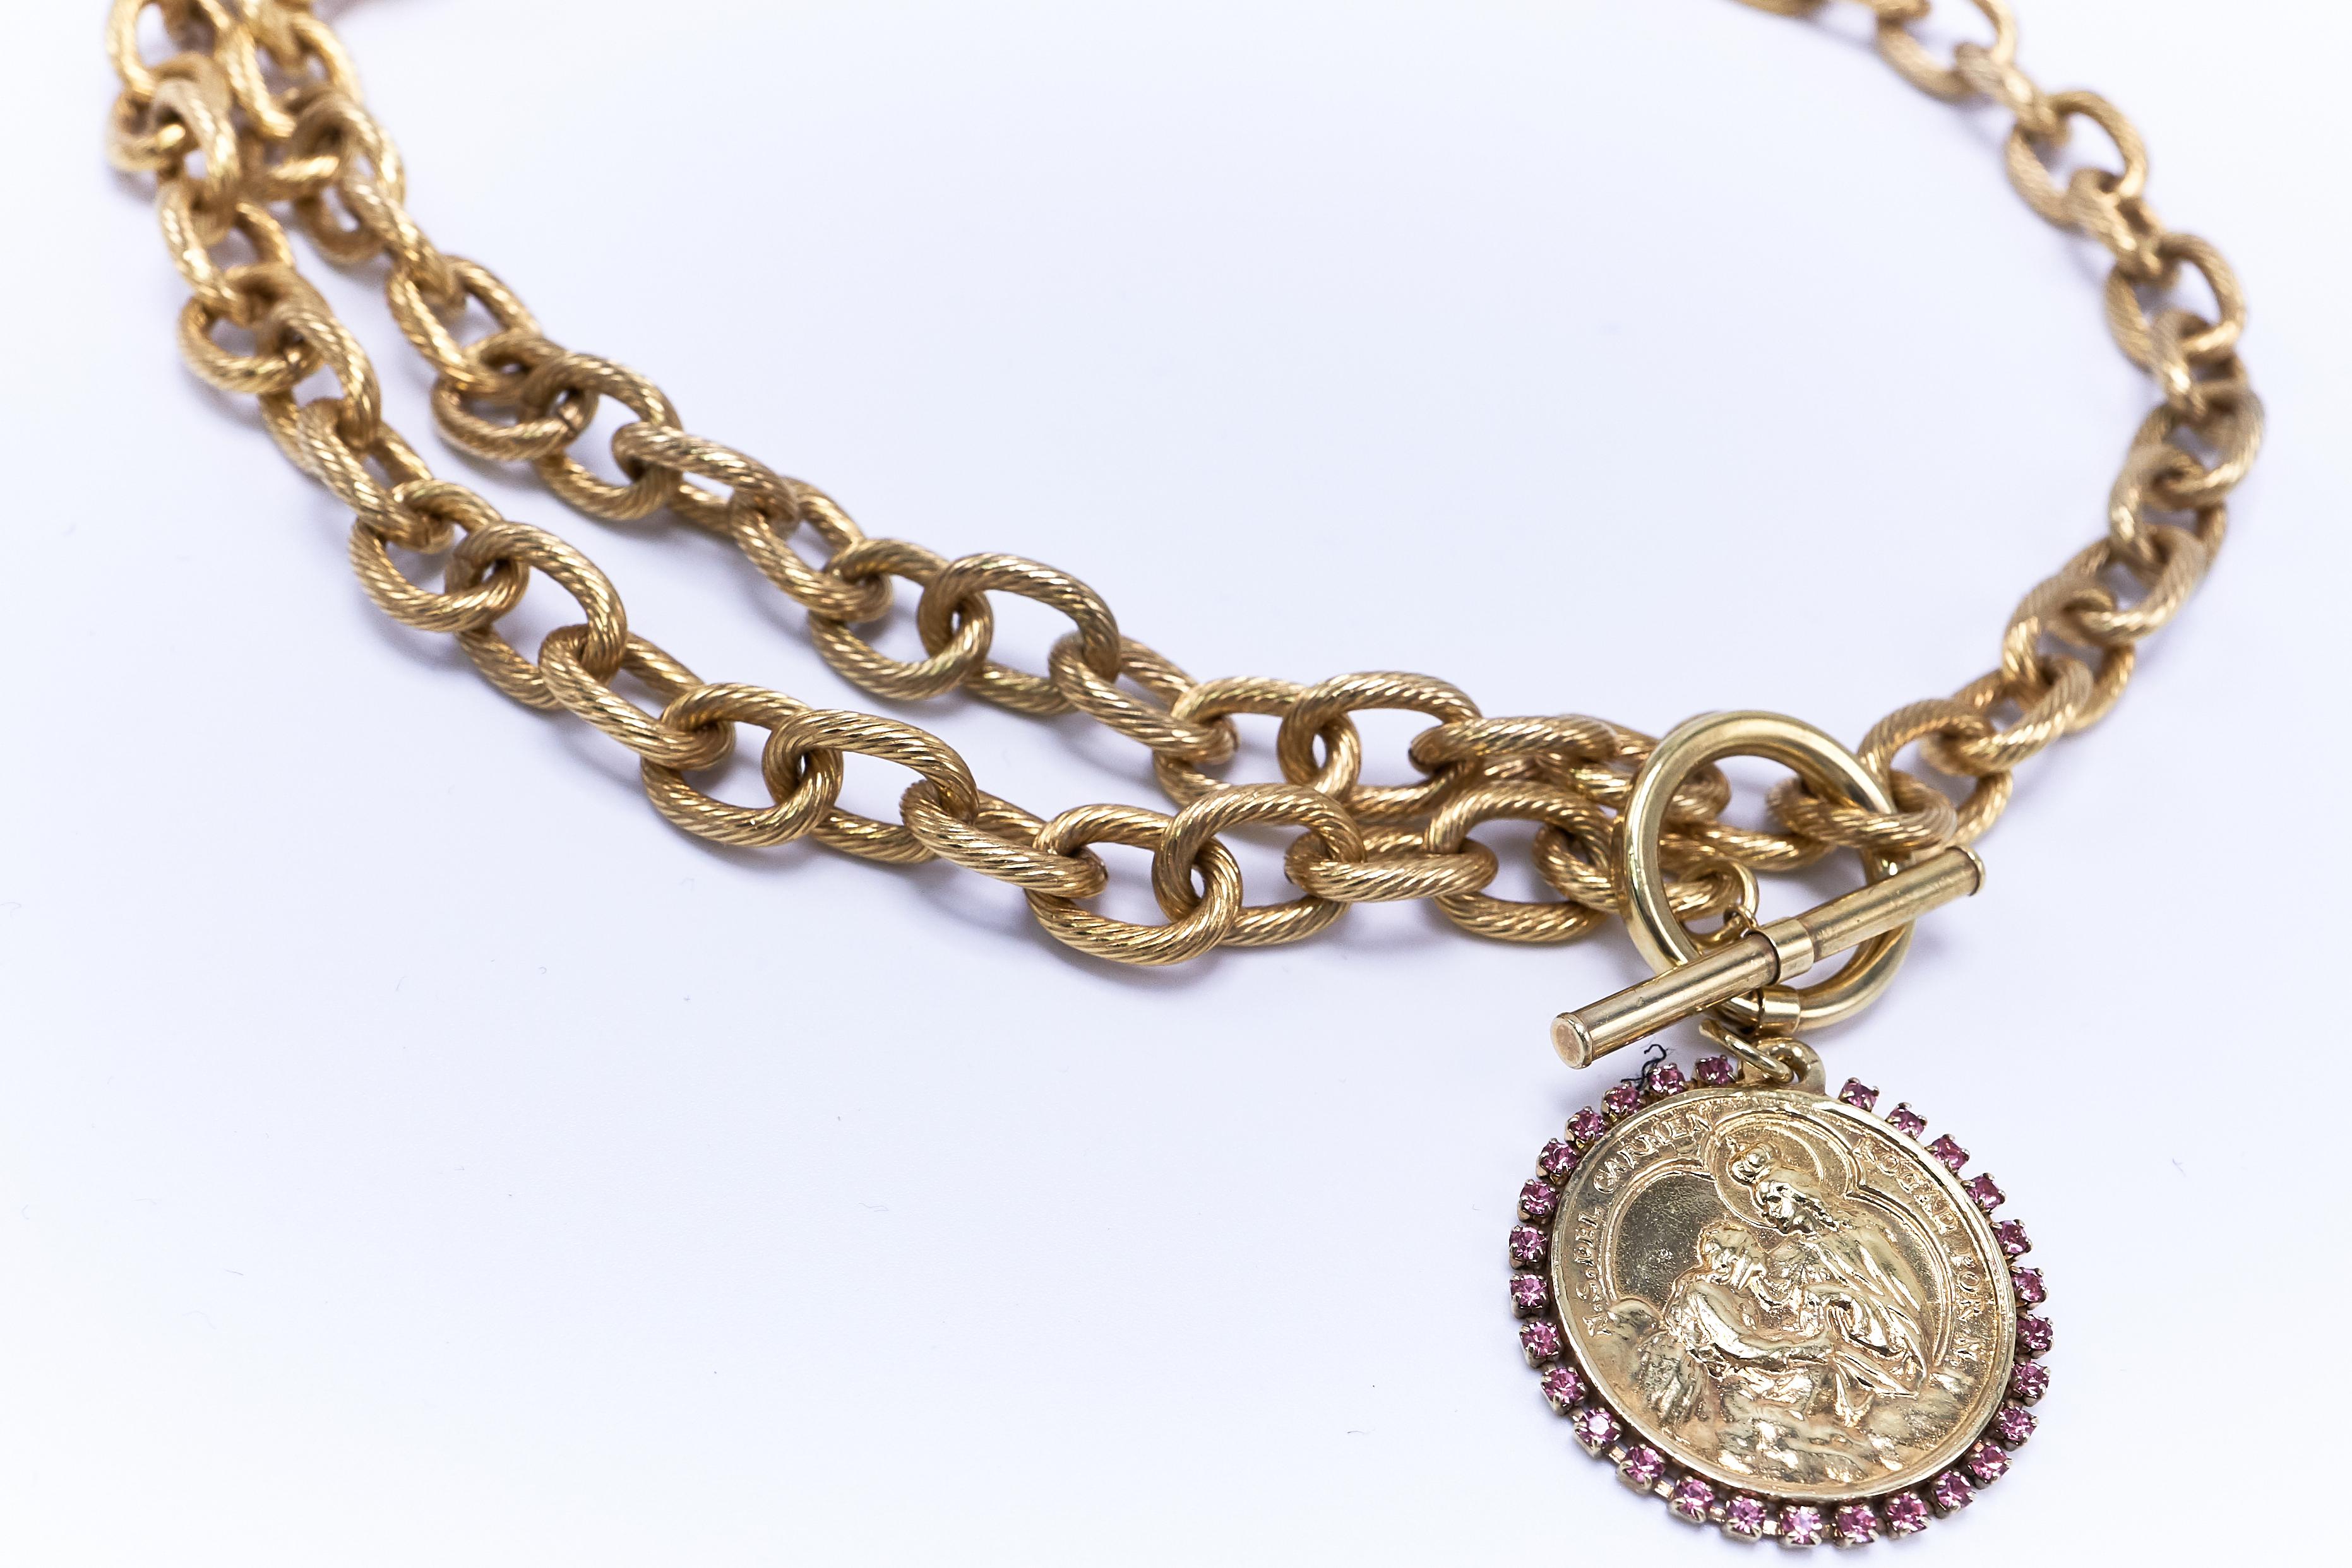 Choker Chain Necklace Medal Rhinestone Gold Plated Pendant J Dauphin In New Condition For Sale In Los Angeles, CA